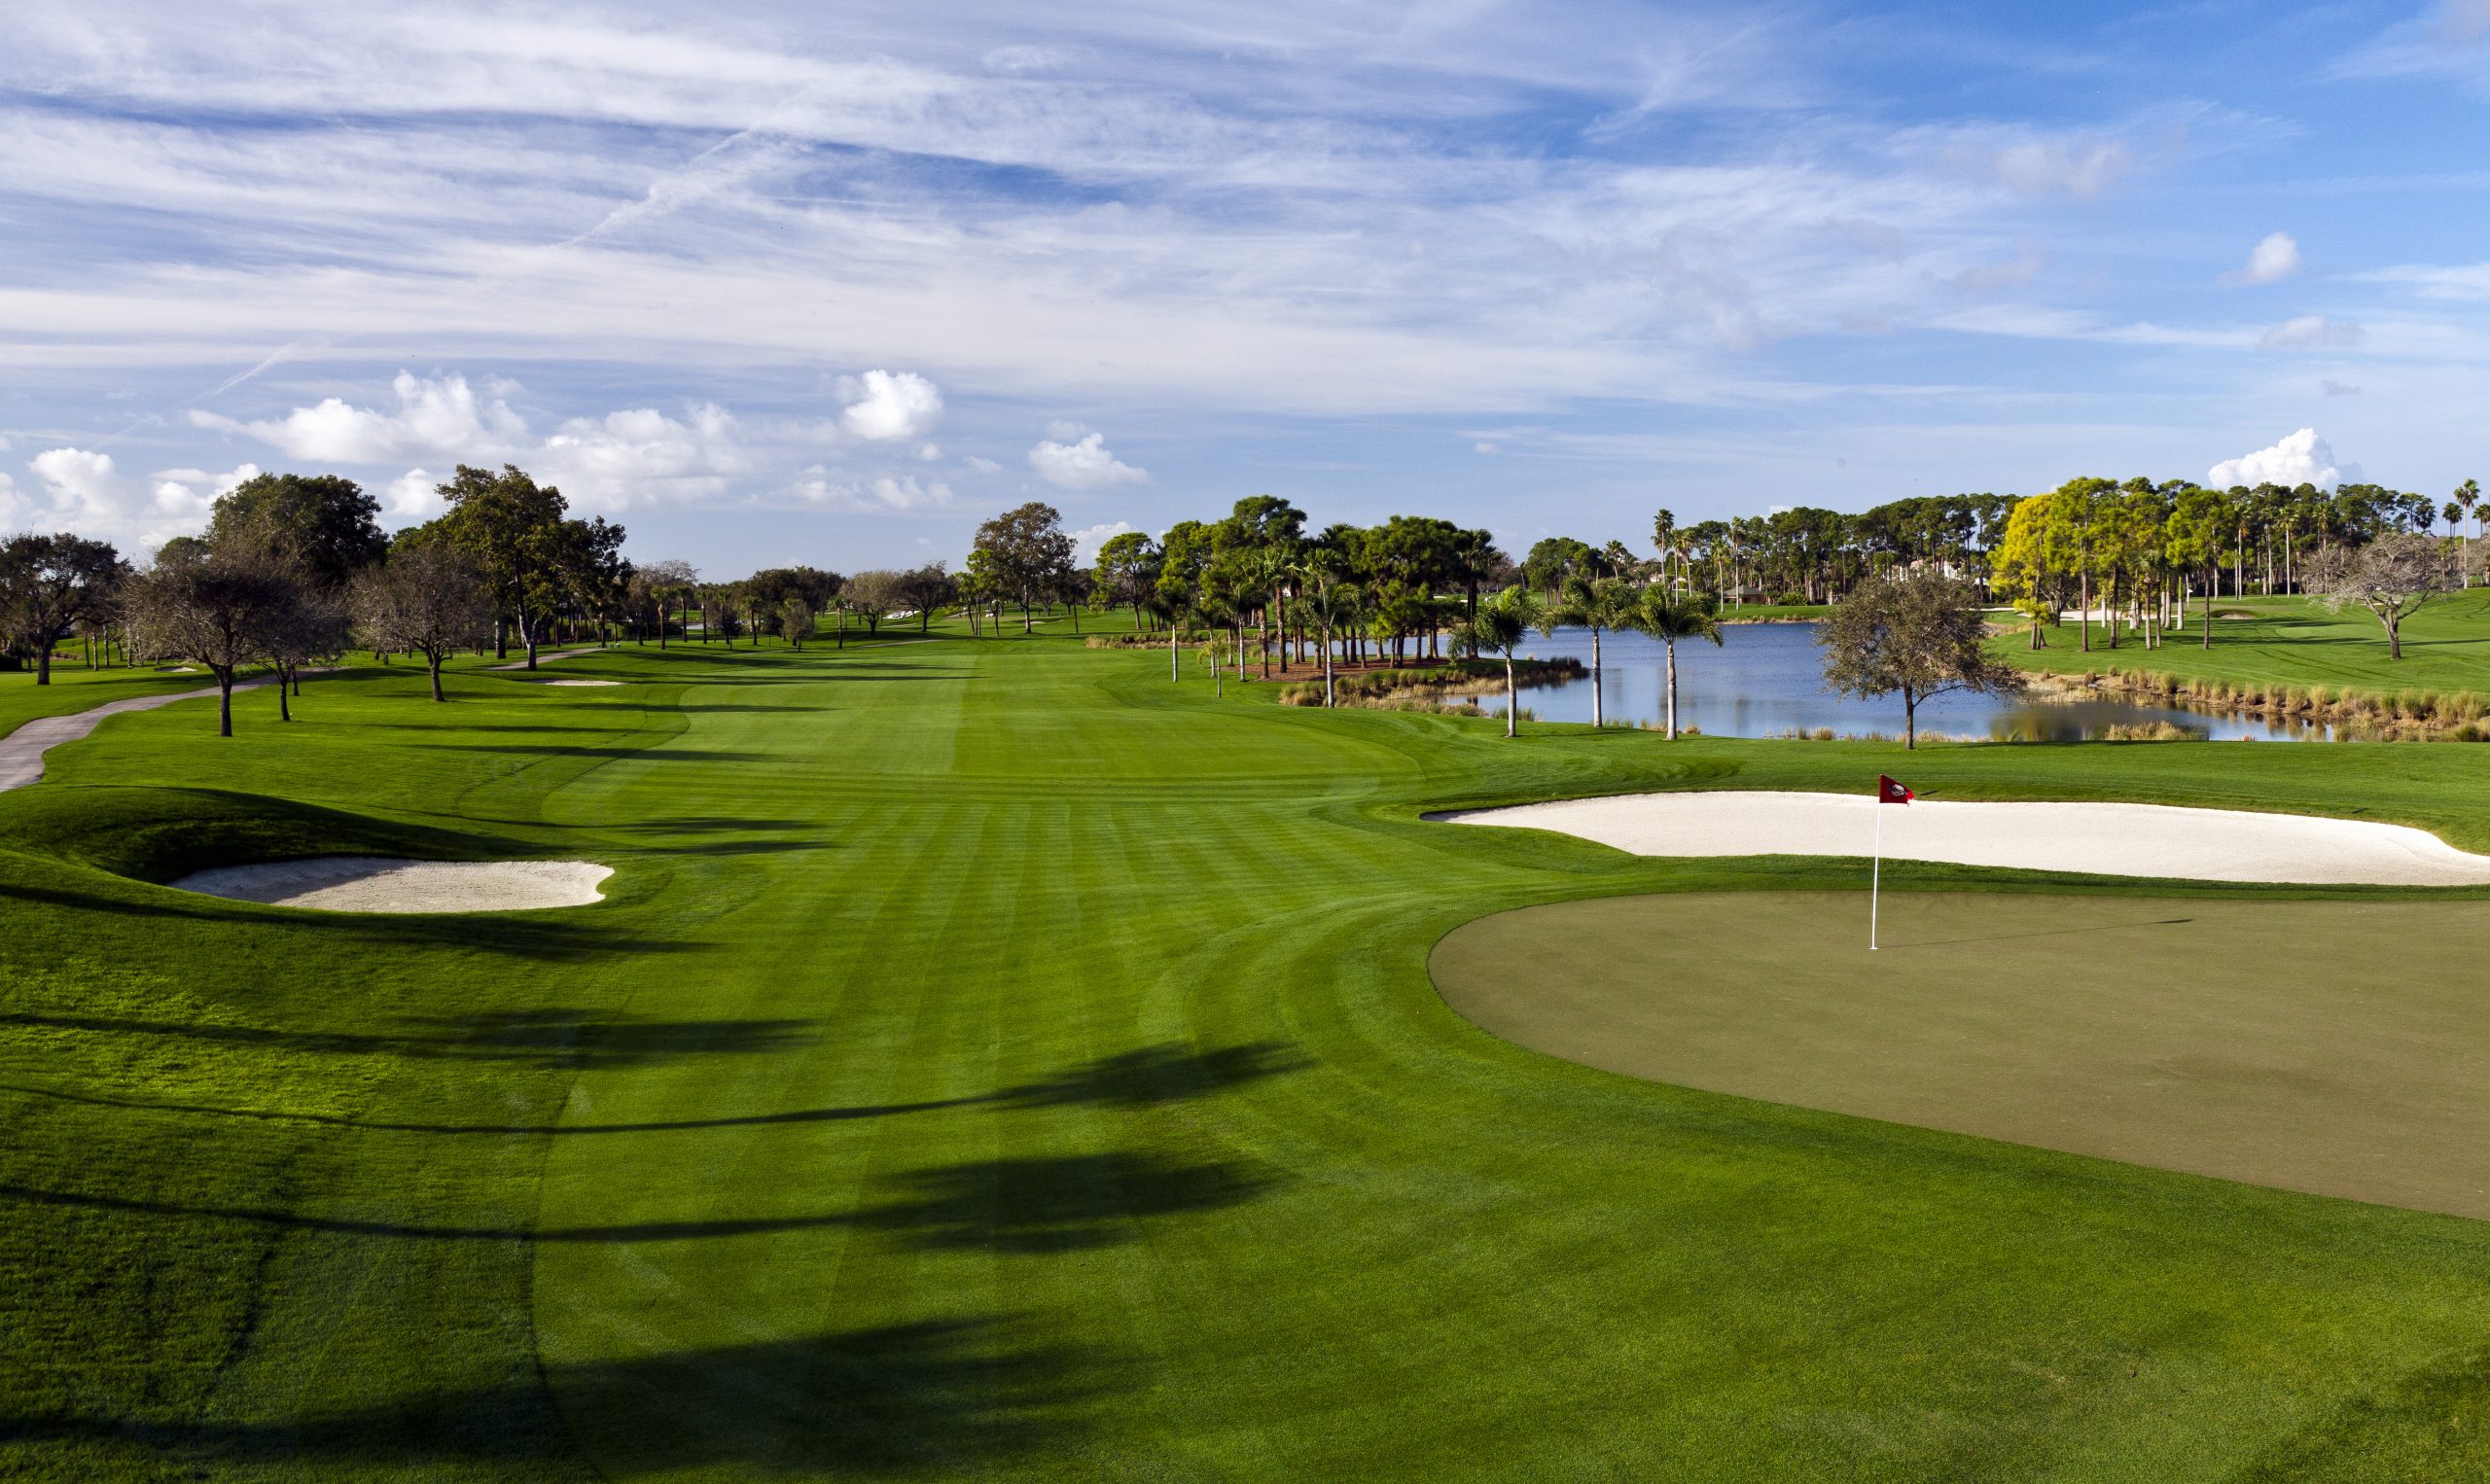 The immaculate lush green striped fairways at PGA National, Florida